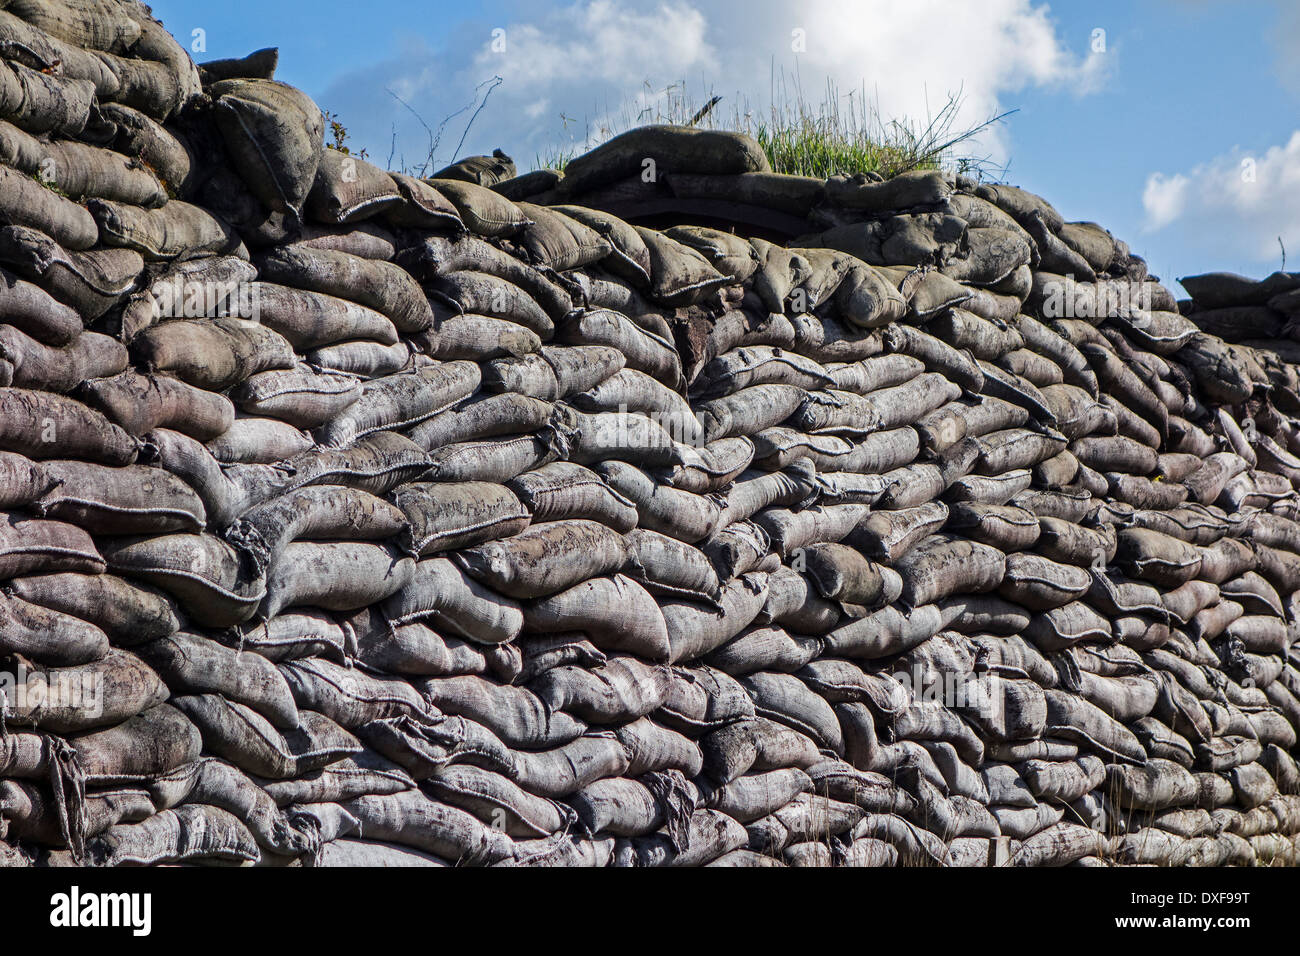 Wall of stacked sandbags in WWI trench used as defence in First World War One warfare Stock Photo